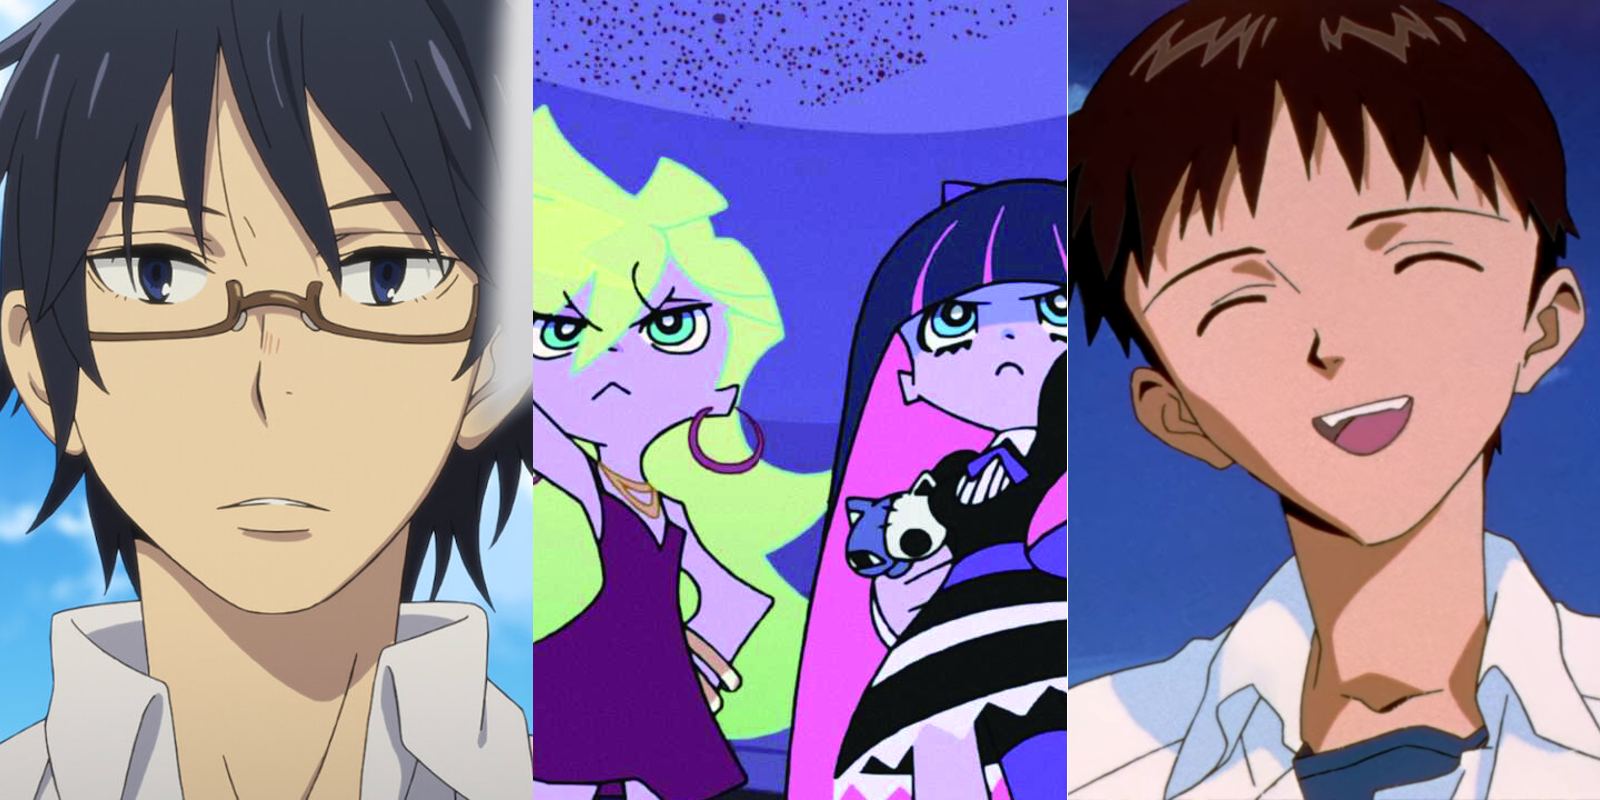 SPOILERS]Panty and Stocking Season 2a guy can dream. : r/anime